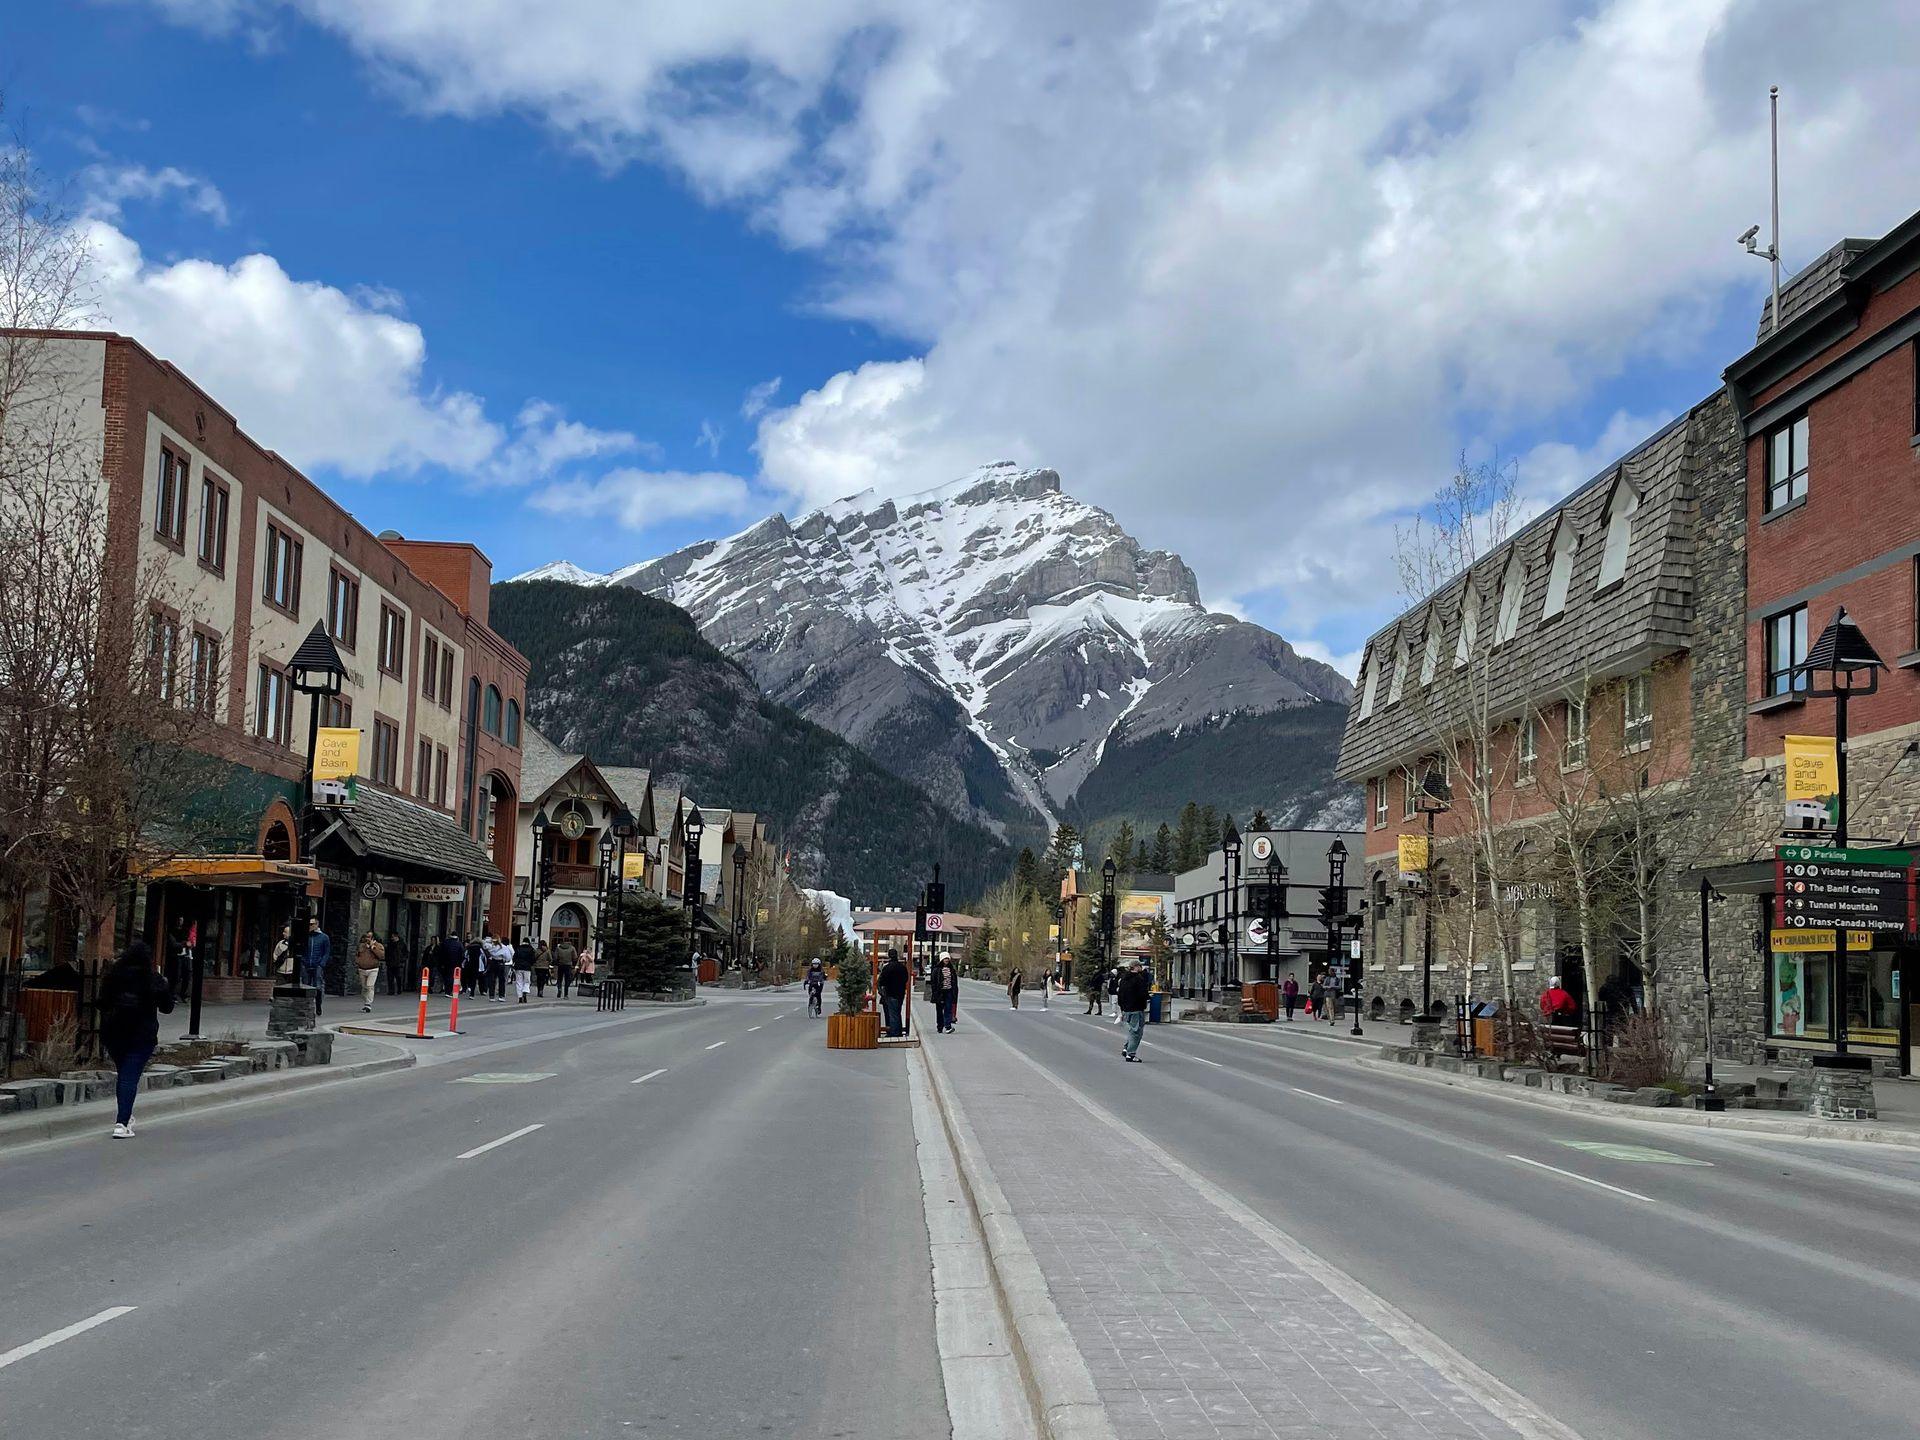 The main street of downtown Banff. There are shops and restaurants on either side a large mountain in the center.